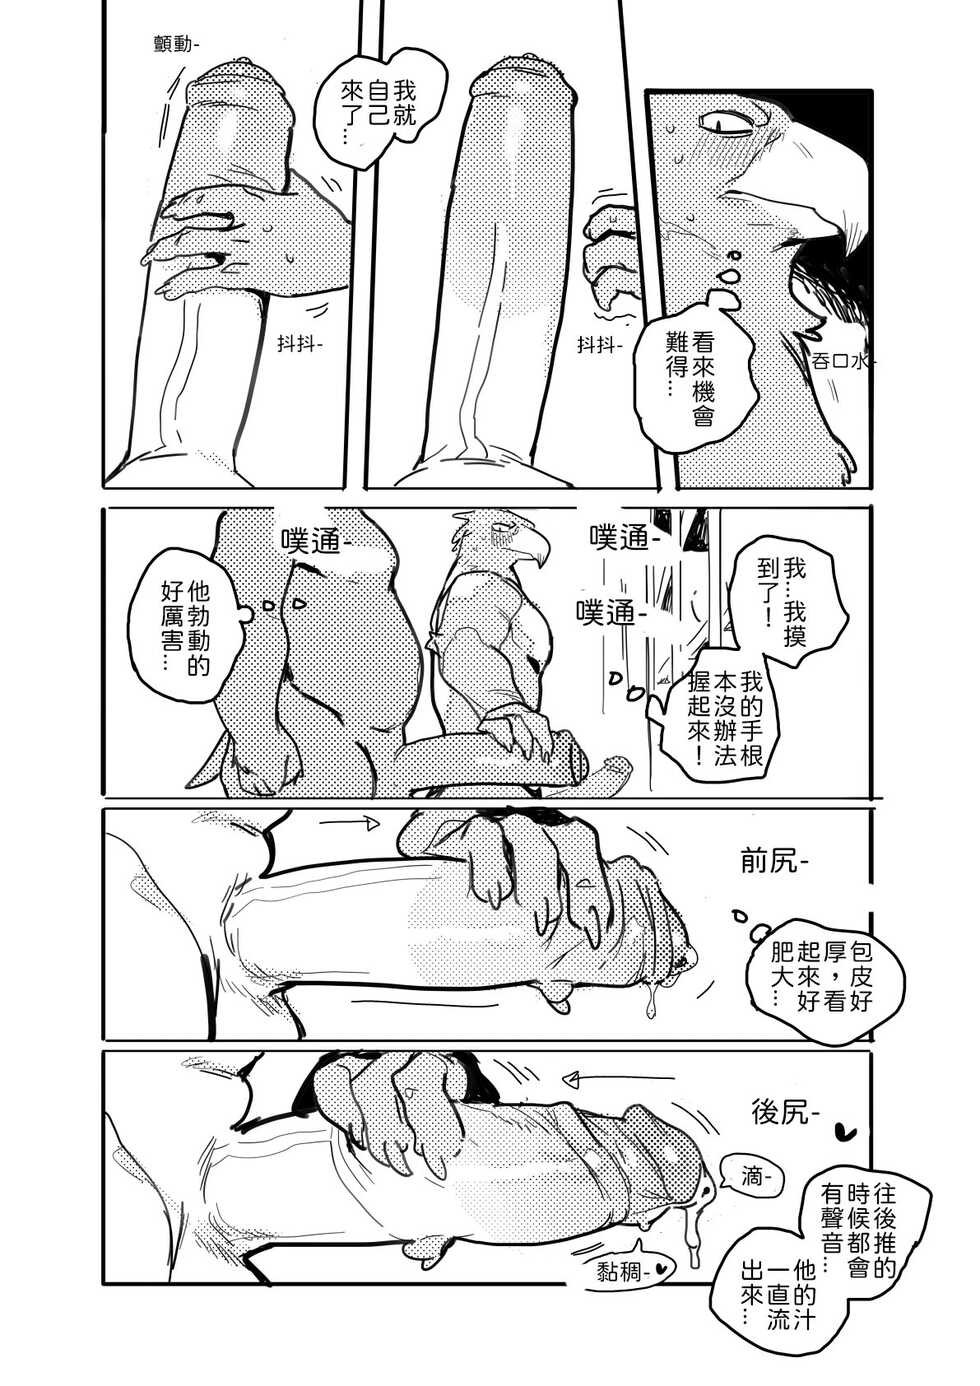 Pelican and White-tailed Eagle 鵜鶘和白尾鷹 - Page 7